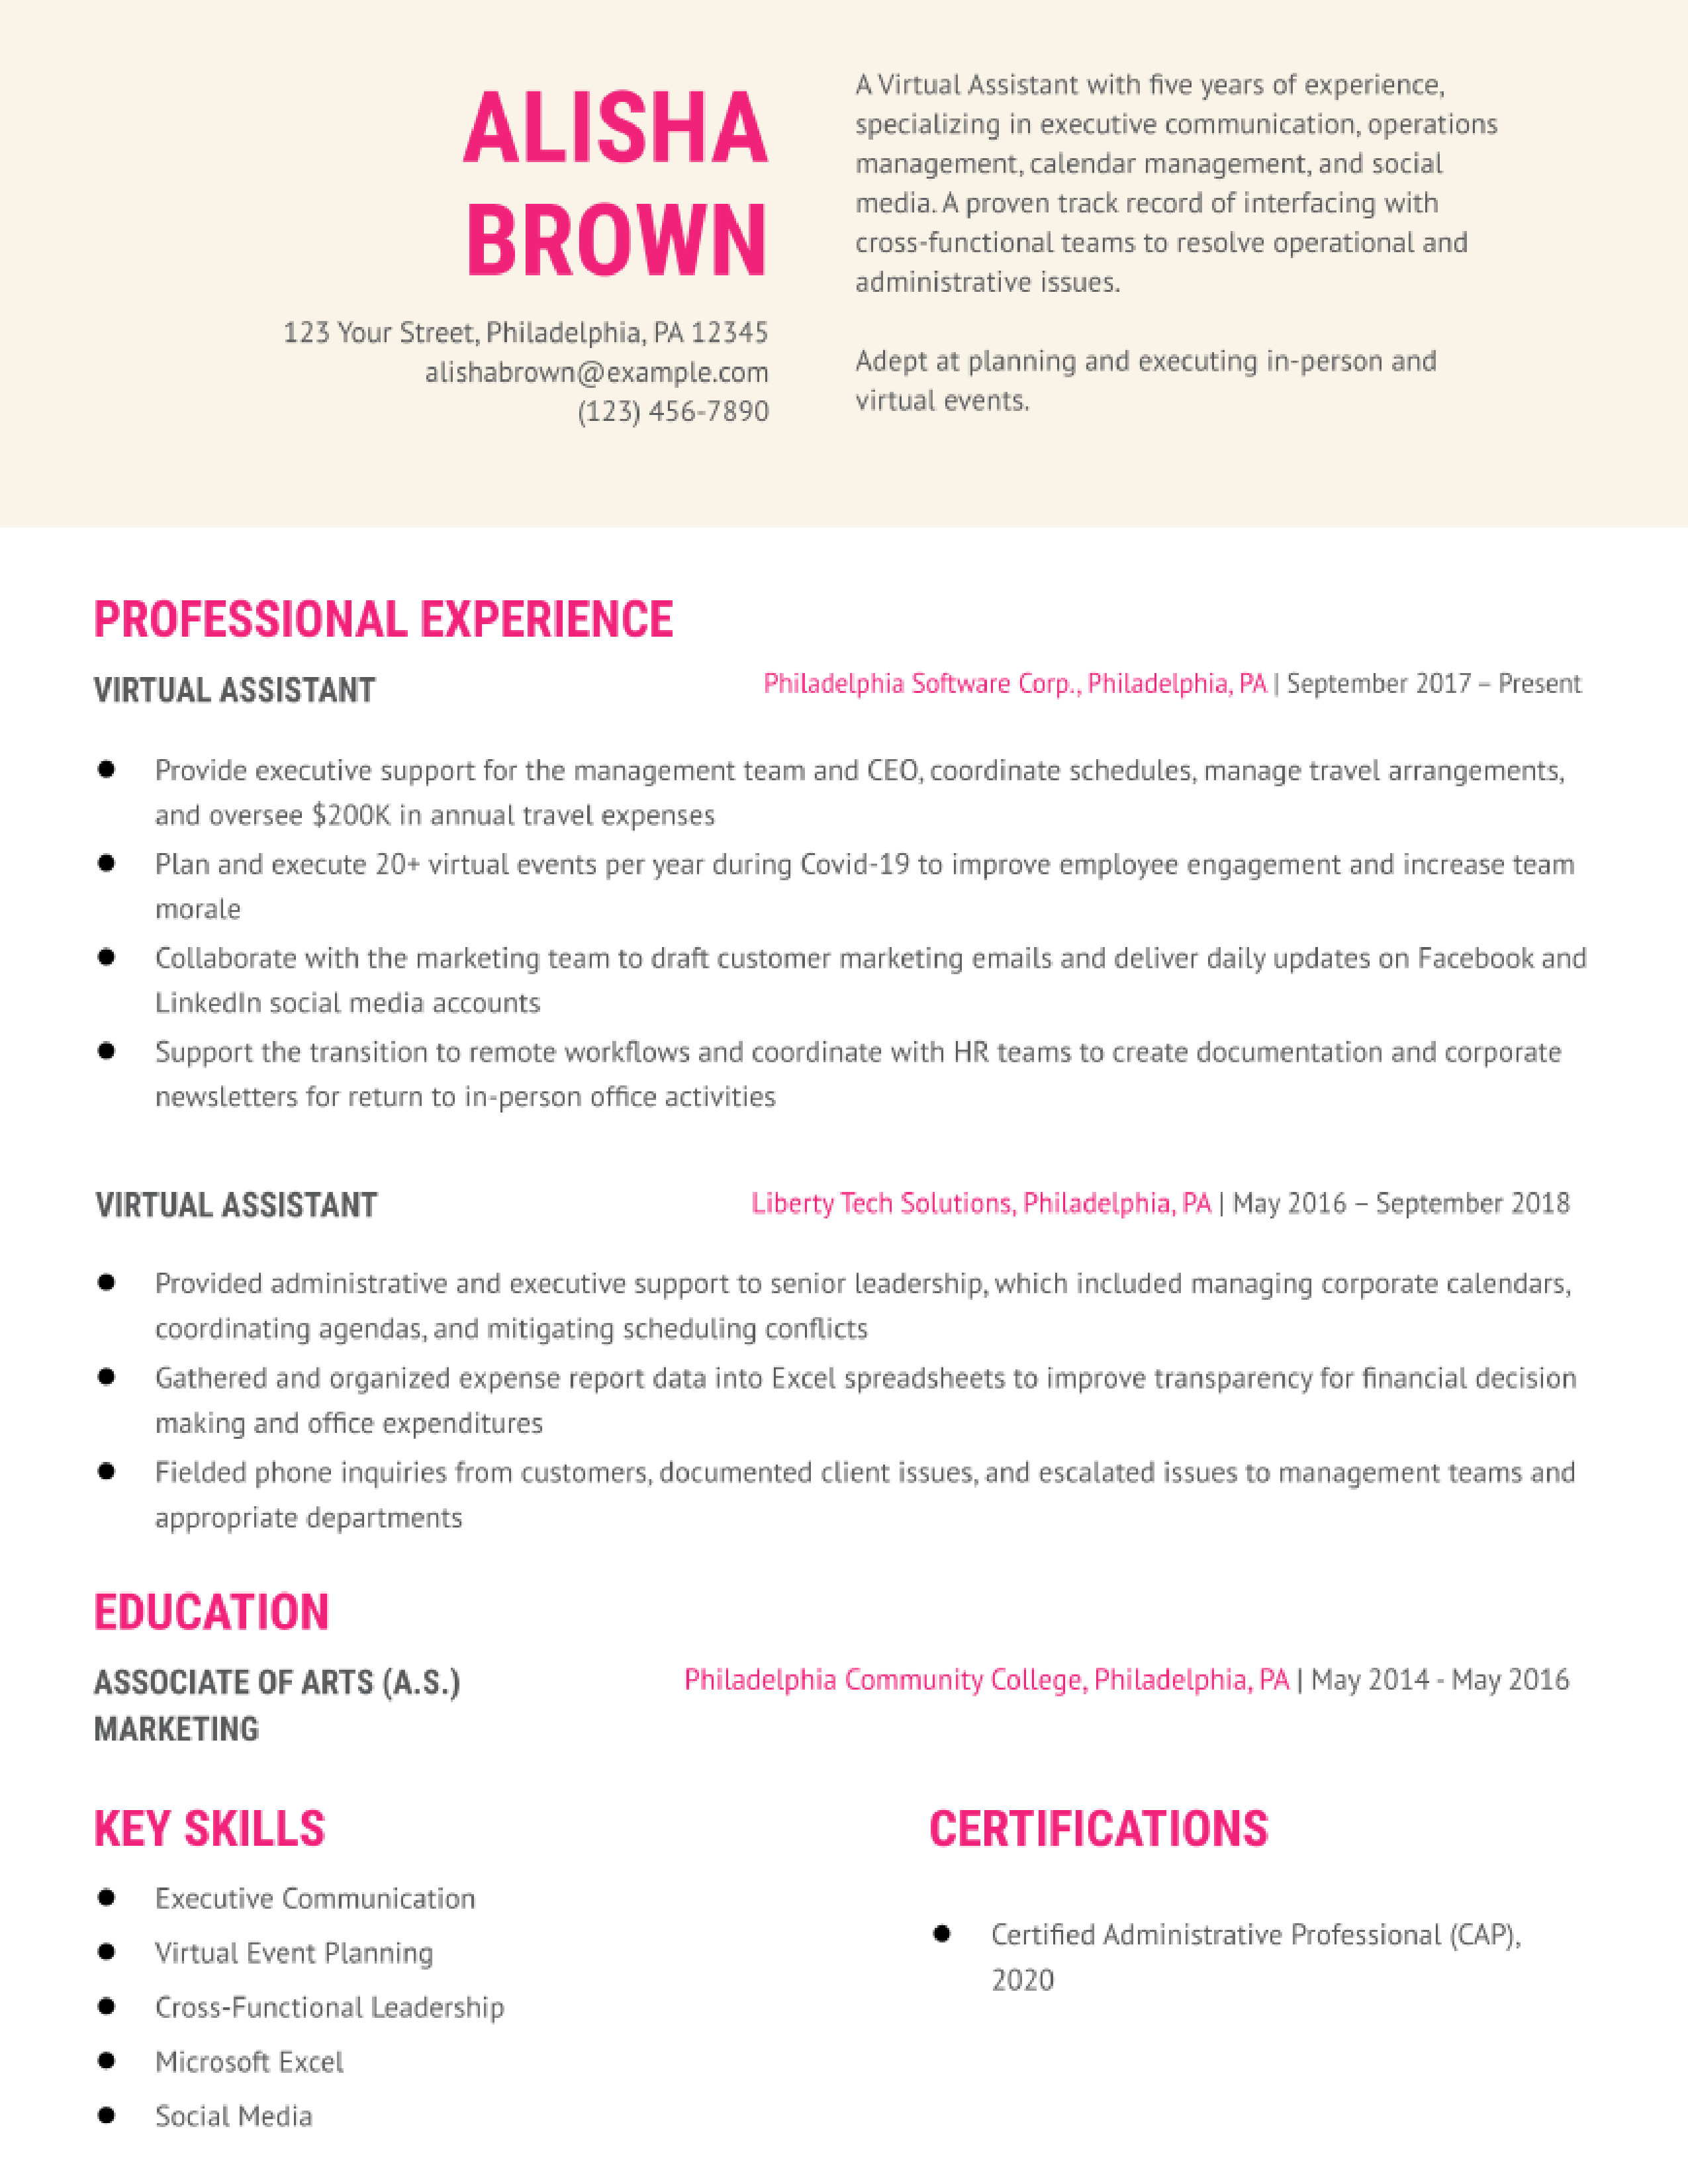 sample resume for virtual assistant with no experience philippines